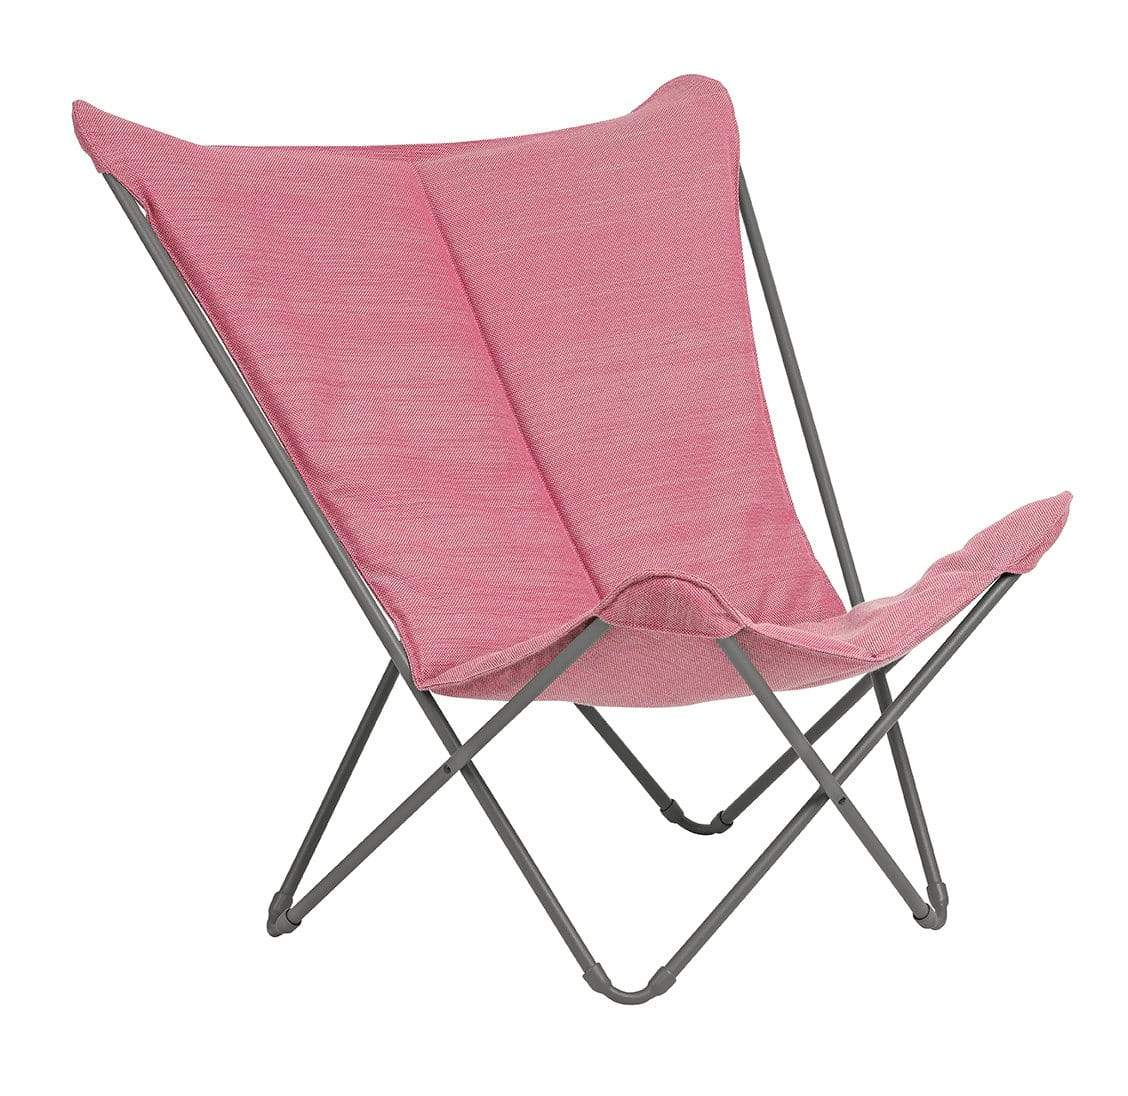 HomeRoots Outdoors Beach Chairs Orchid / Frame: Galvanized steel; Fabric: Hedona Lounge Chair - Titane Steel Frame - Orchid Hedona Fabric